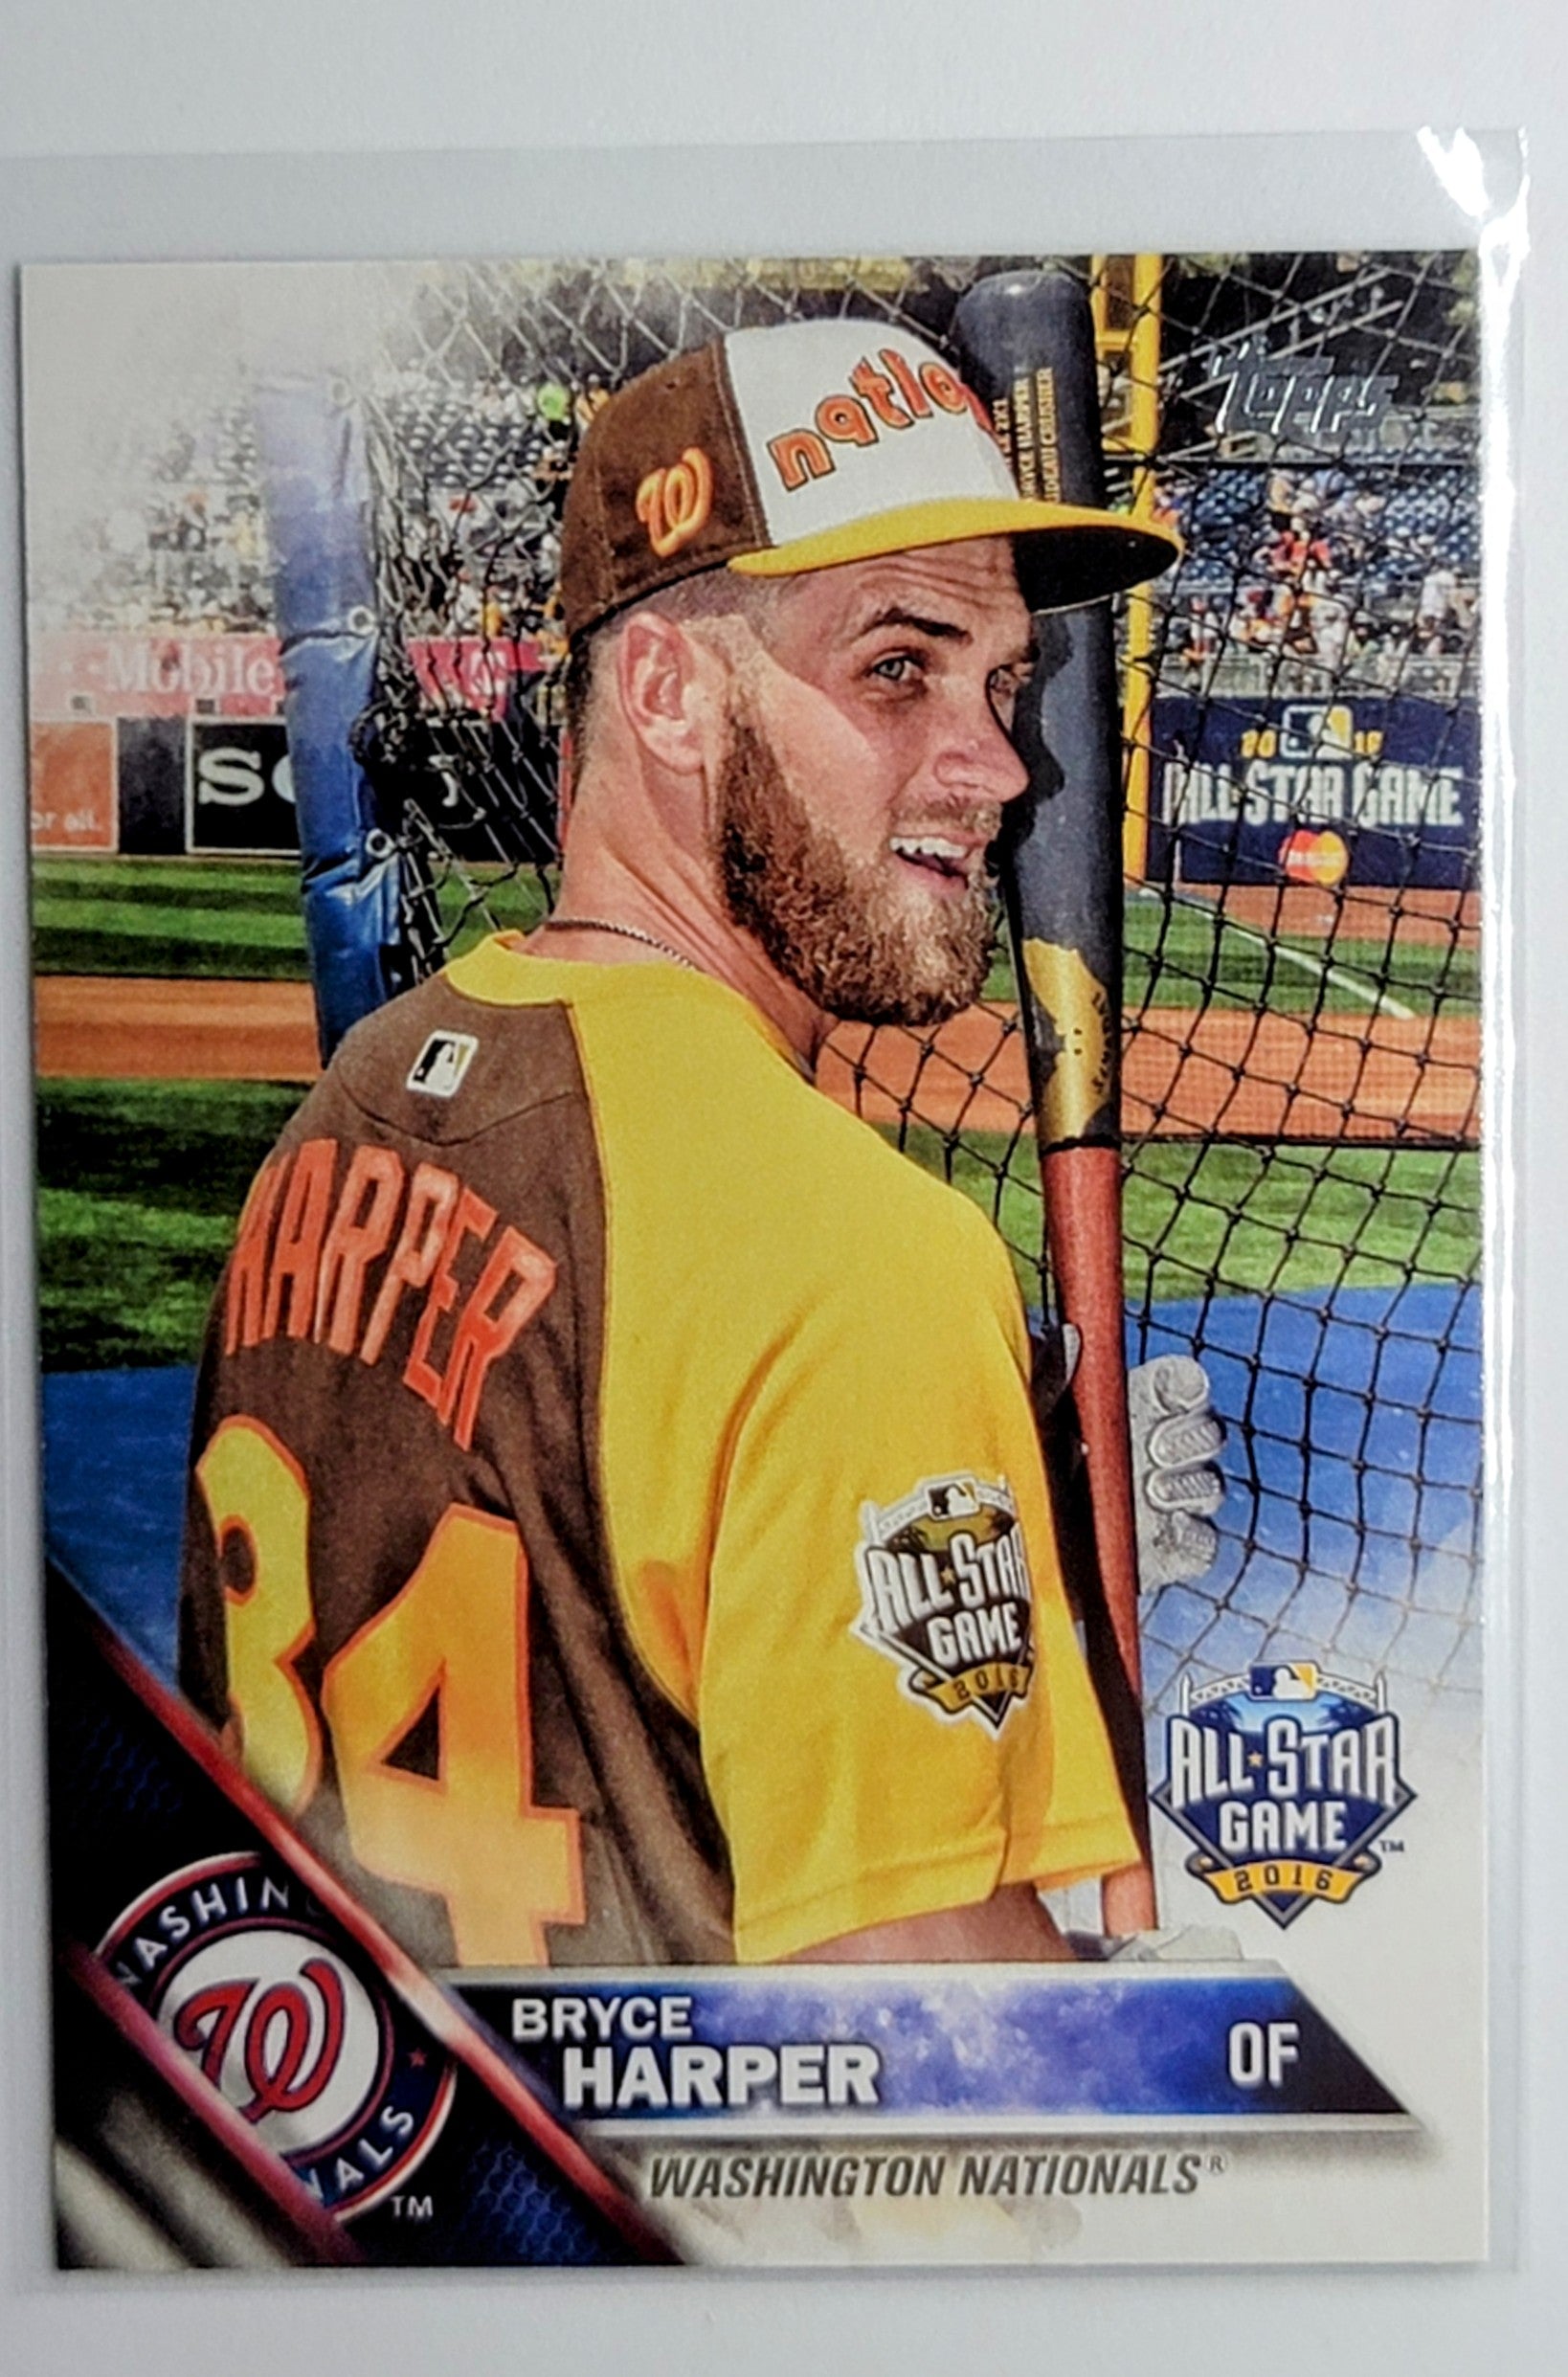 2016 Topps Update Bryce
  Harper   AS Washington Nationals
  Baseball Card  TH1CB simple Xclusive Collectibles   